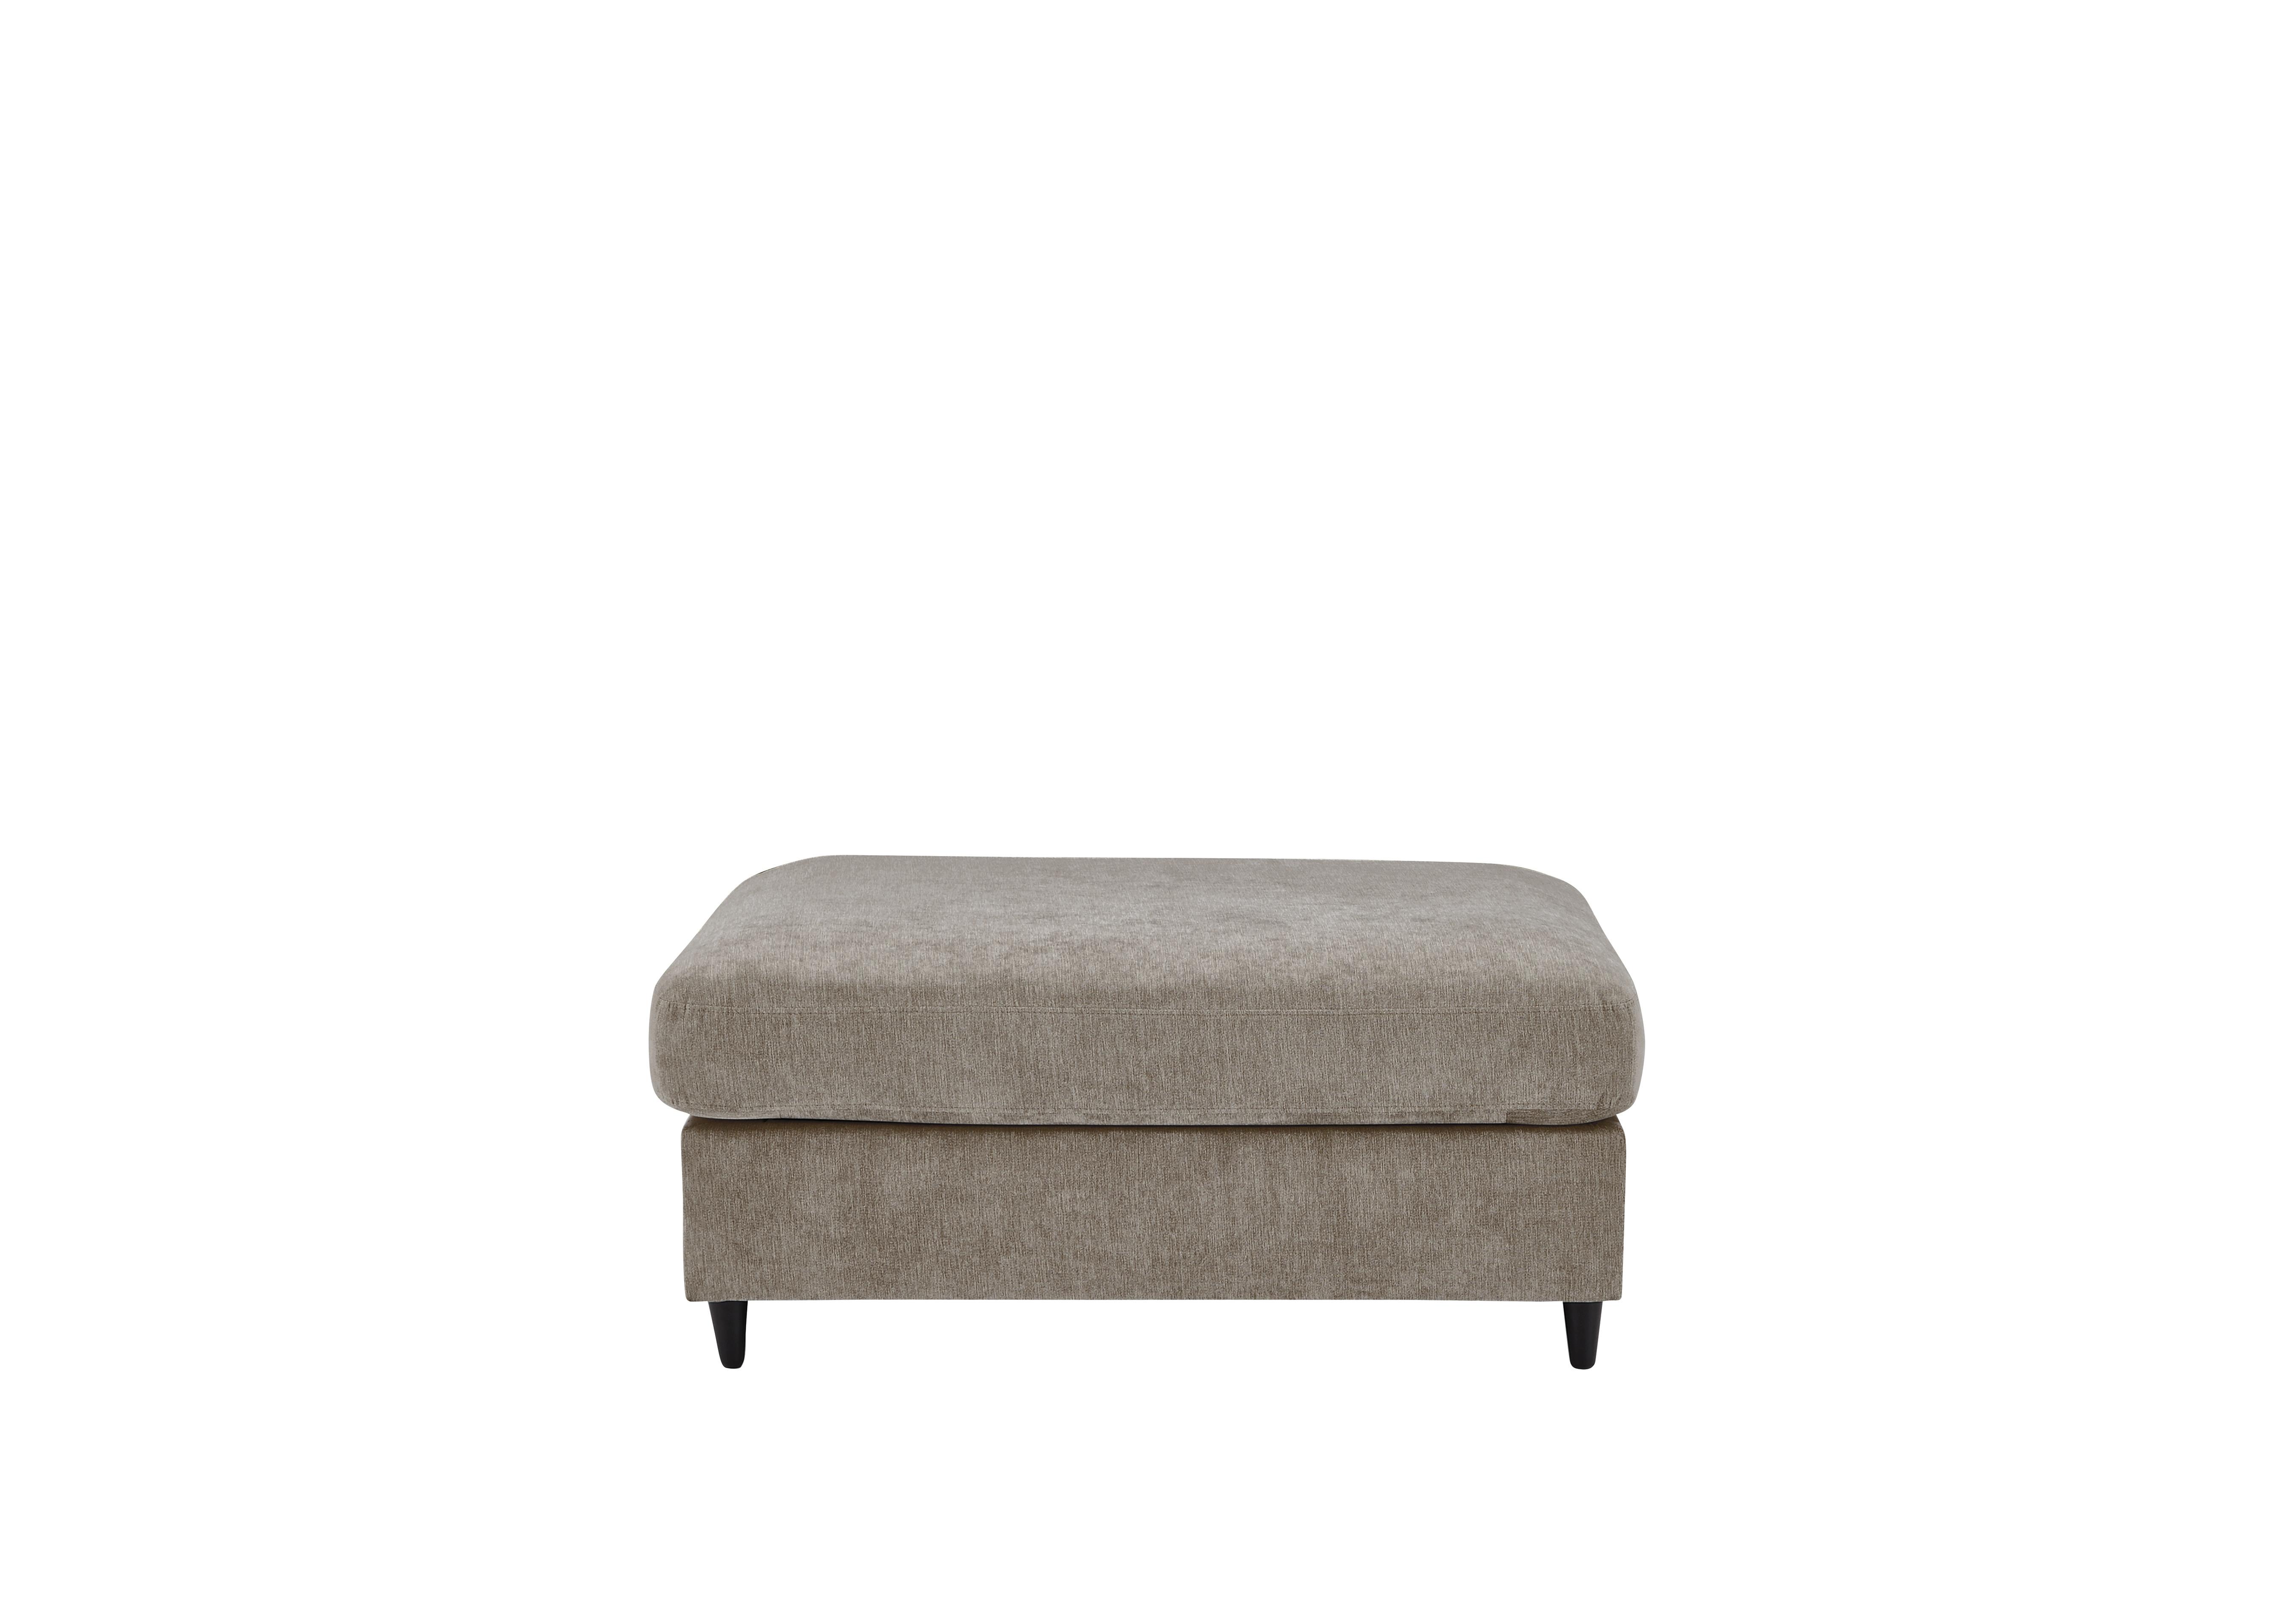 Esprit Small Fabric Stool Sofa Bed in Taupe Ebony Feet on Furniture Village